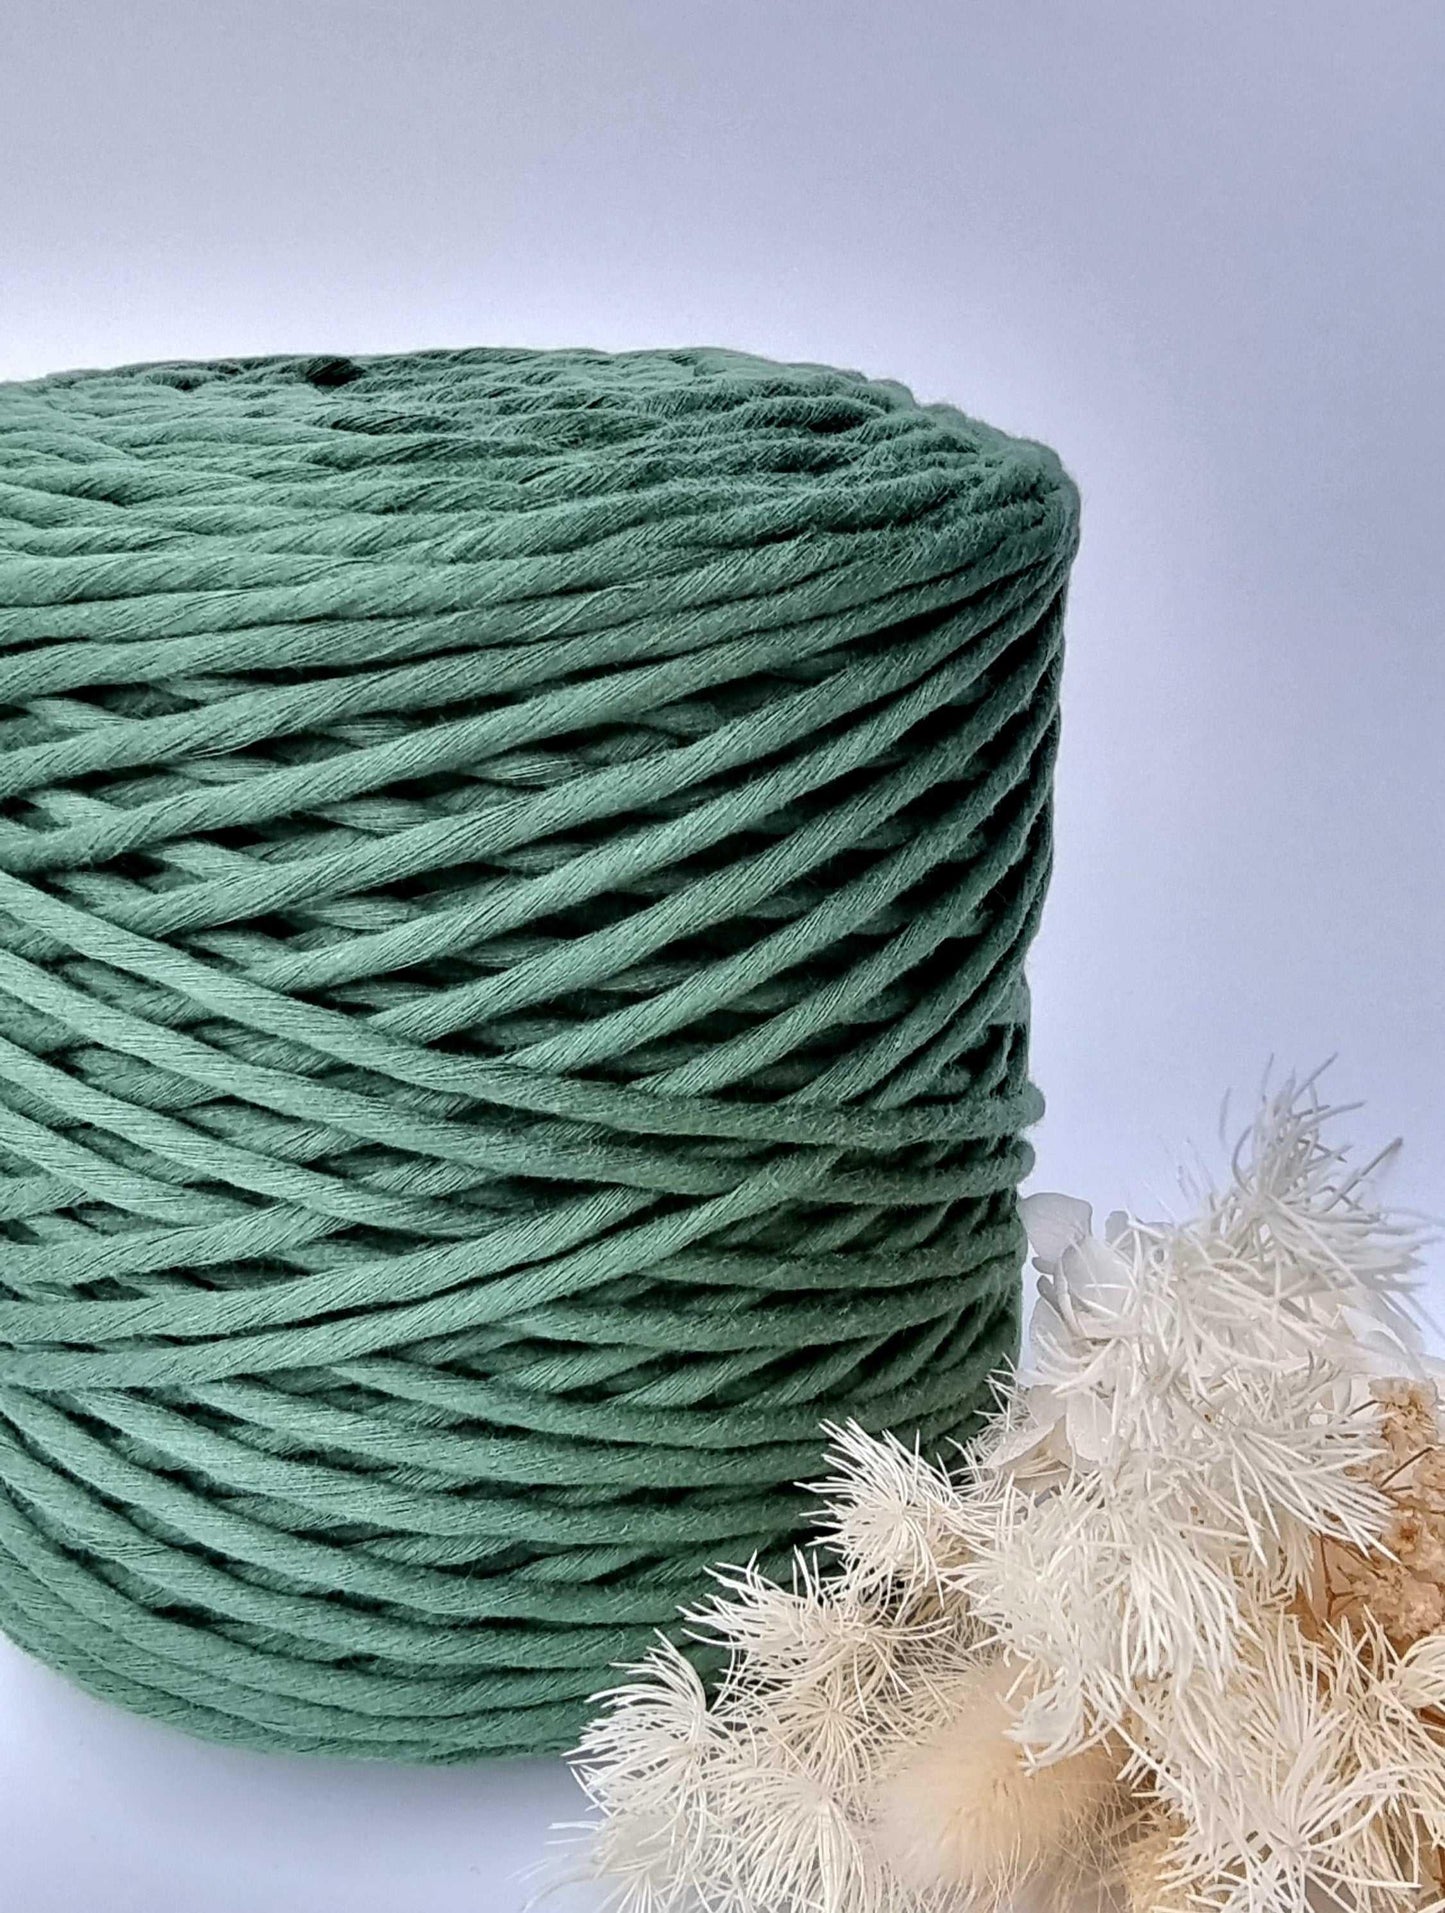 Emerald Green Macrame Cord - 3MM  Single Strand Luxe Cotton String 1KG Stardust Melbourne